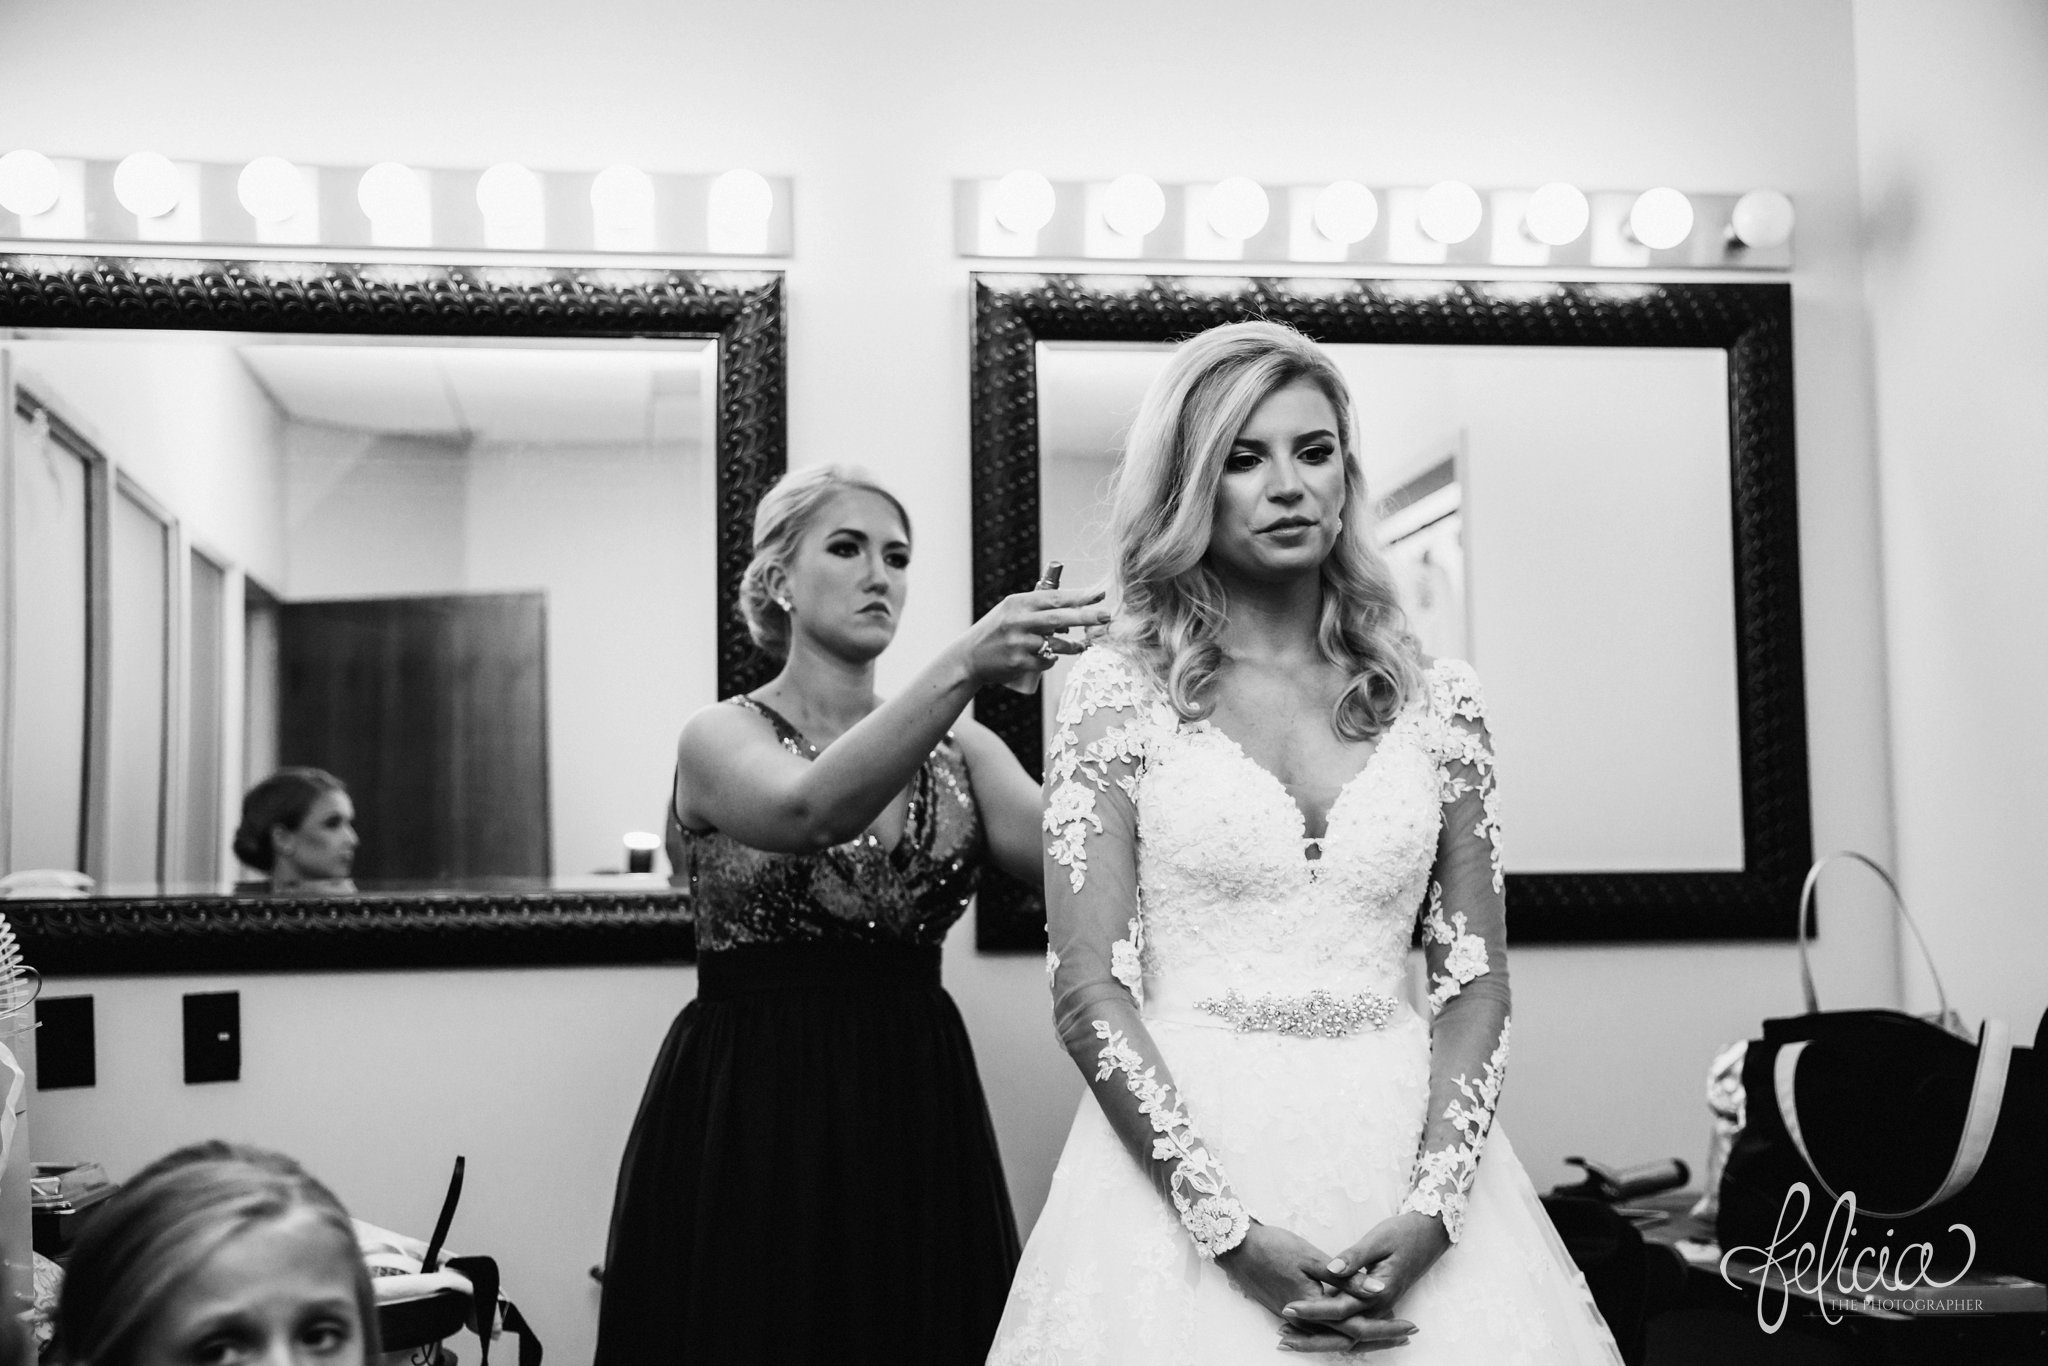 images by feliciathephotographer.com | wedding photographer | kansas city | redemptorist | classic | getting ready | pre-ceremony | lace long sleeve dress | bride | etsy | belle vogue | black and white | 